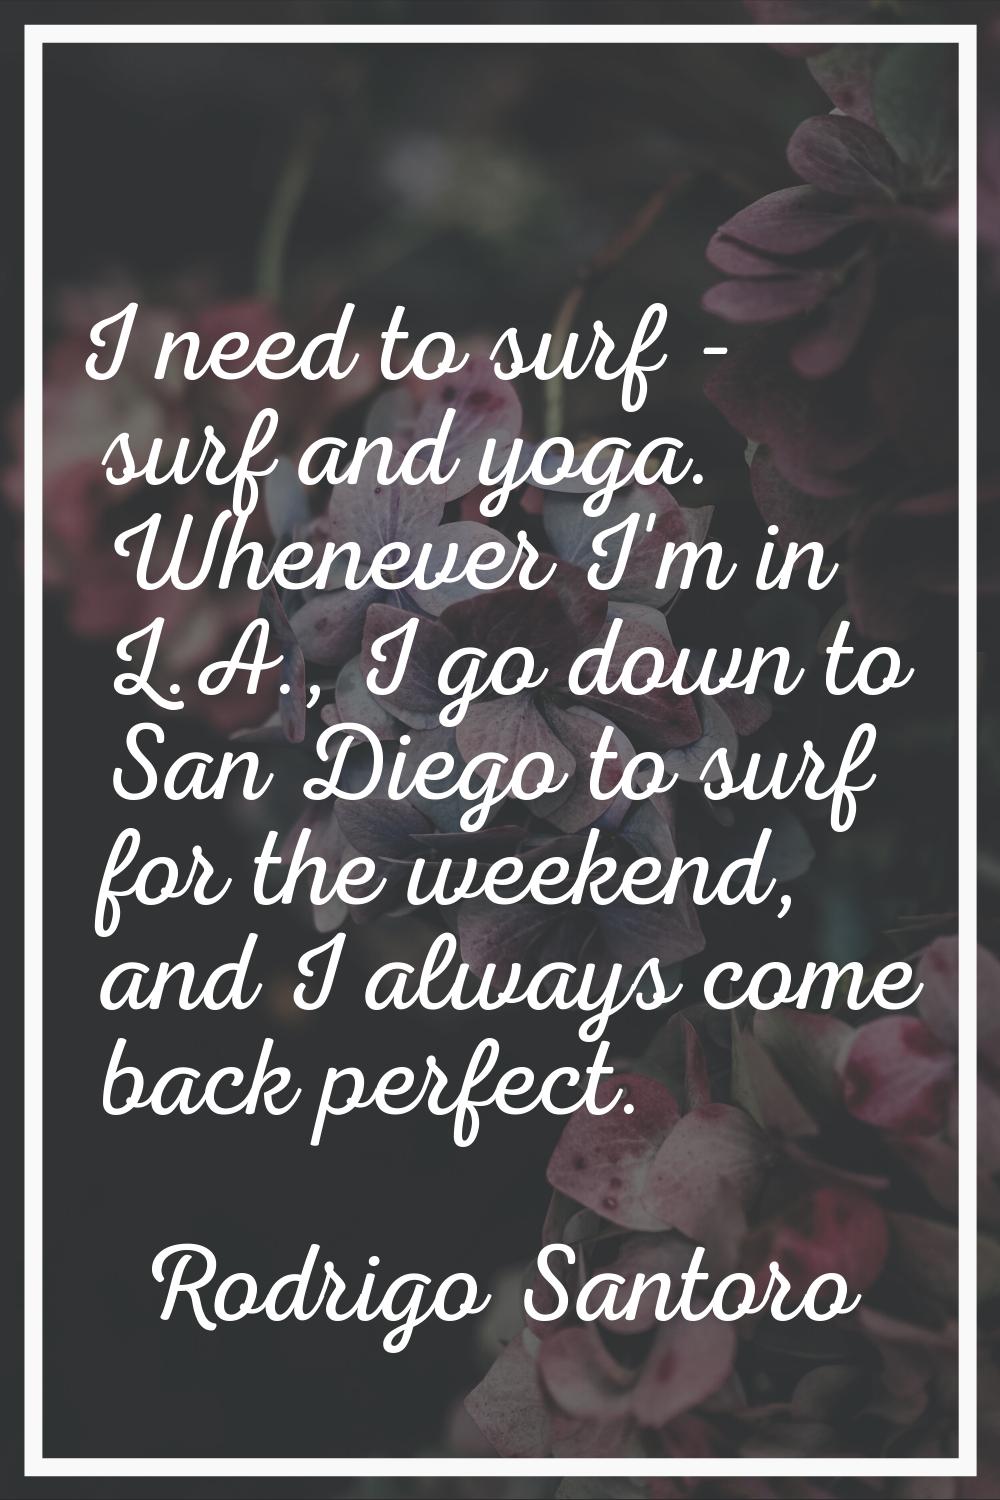 I need to surf - surf and yoga. Whenever I'm in L.A., I go down to San Diego to surf for the weeken